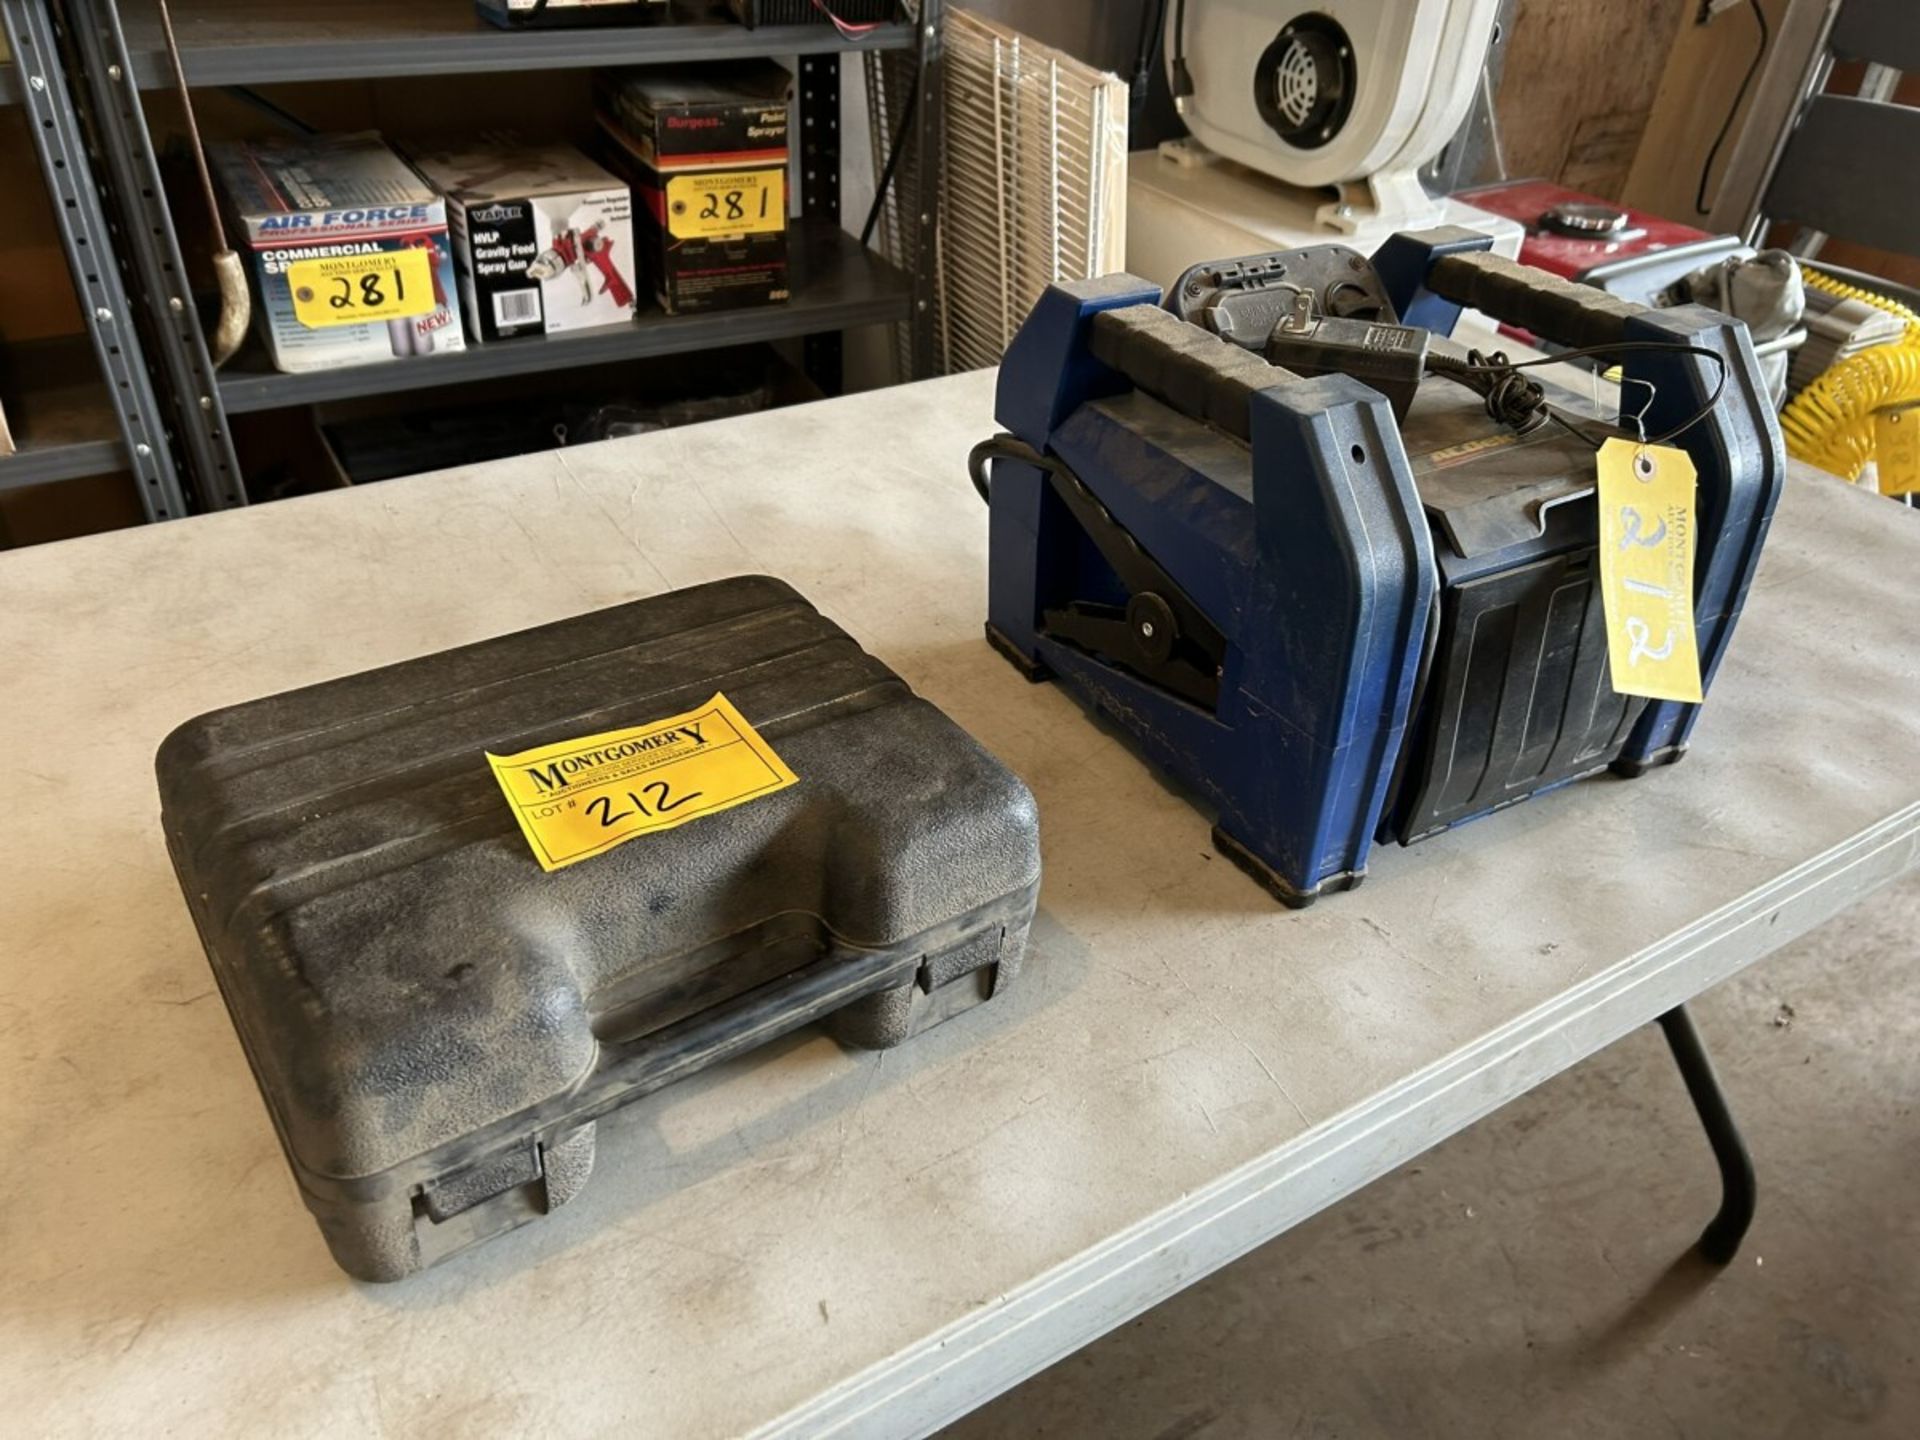 AC DELCO BATTERY BOOSTER PACK AND 12V AIR COMPRESSOR